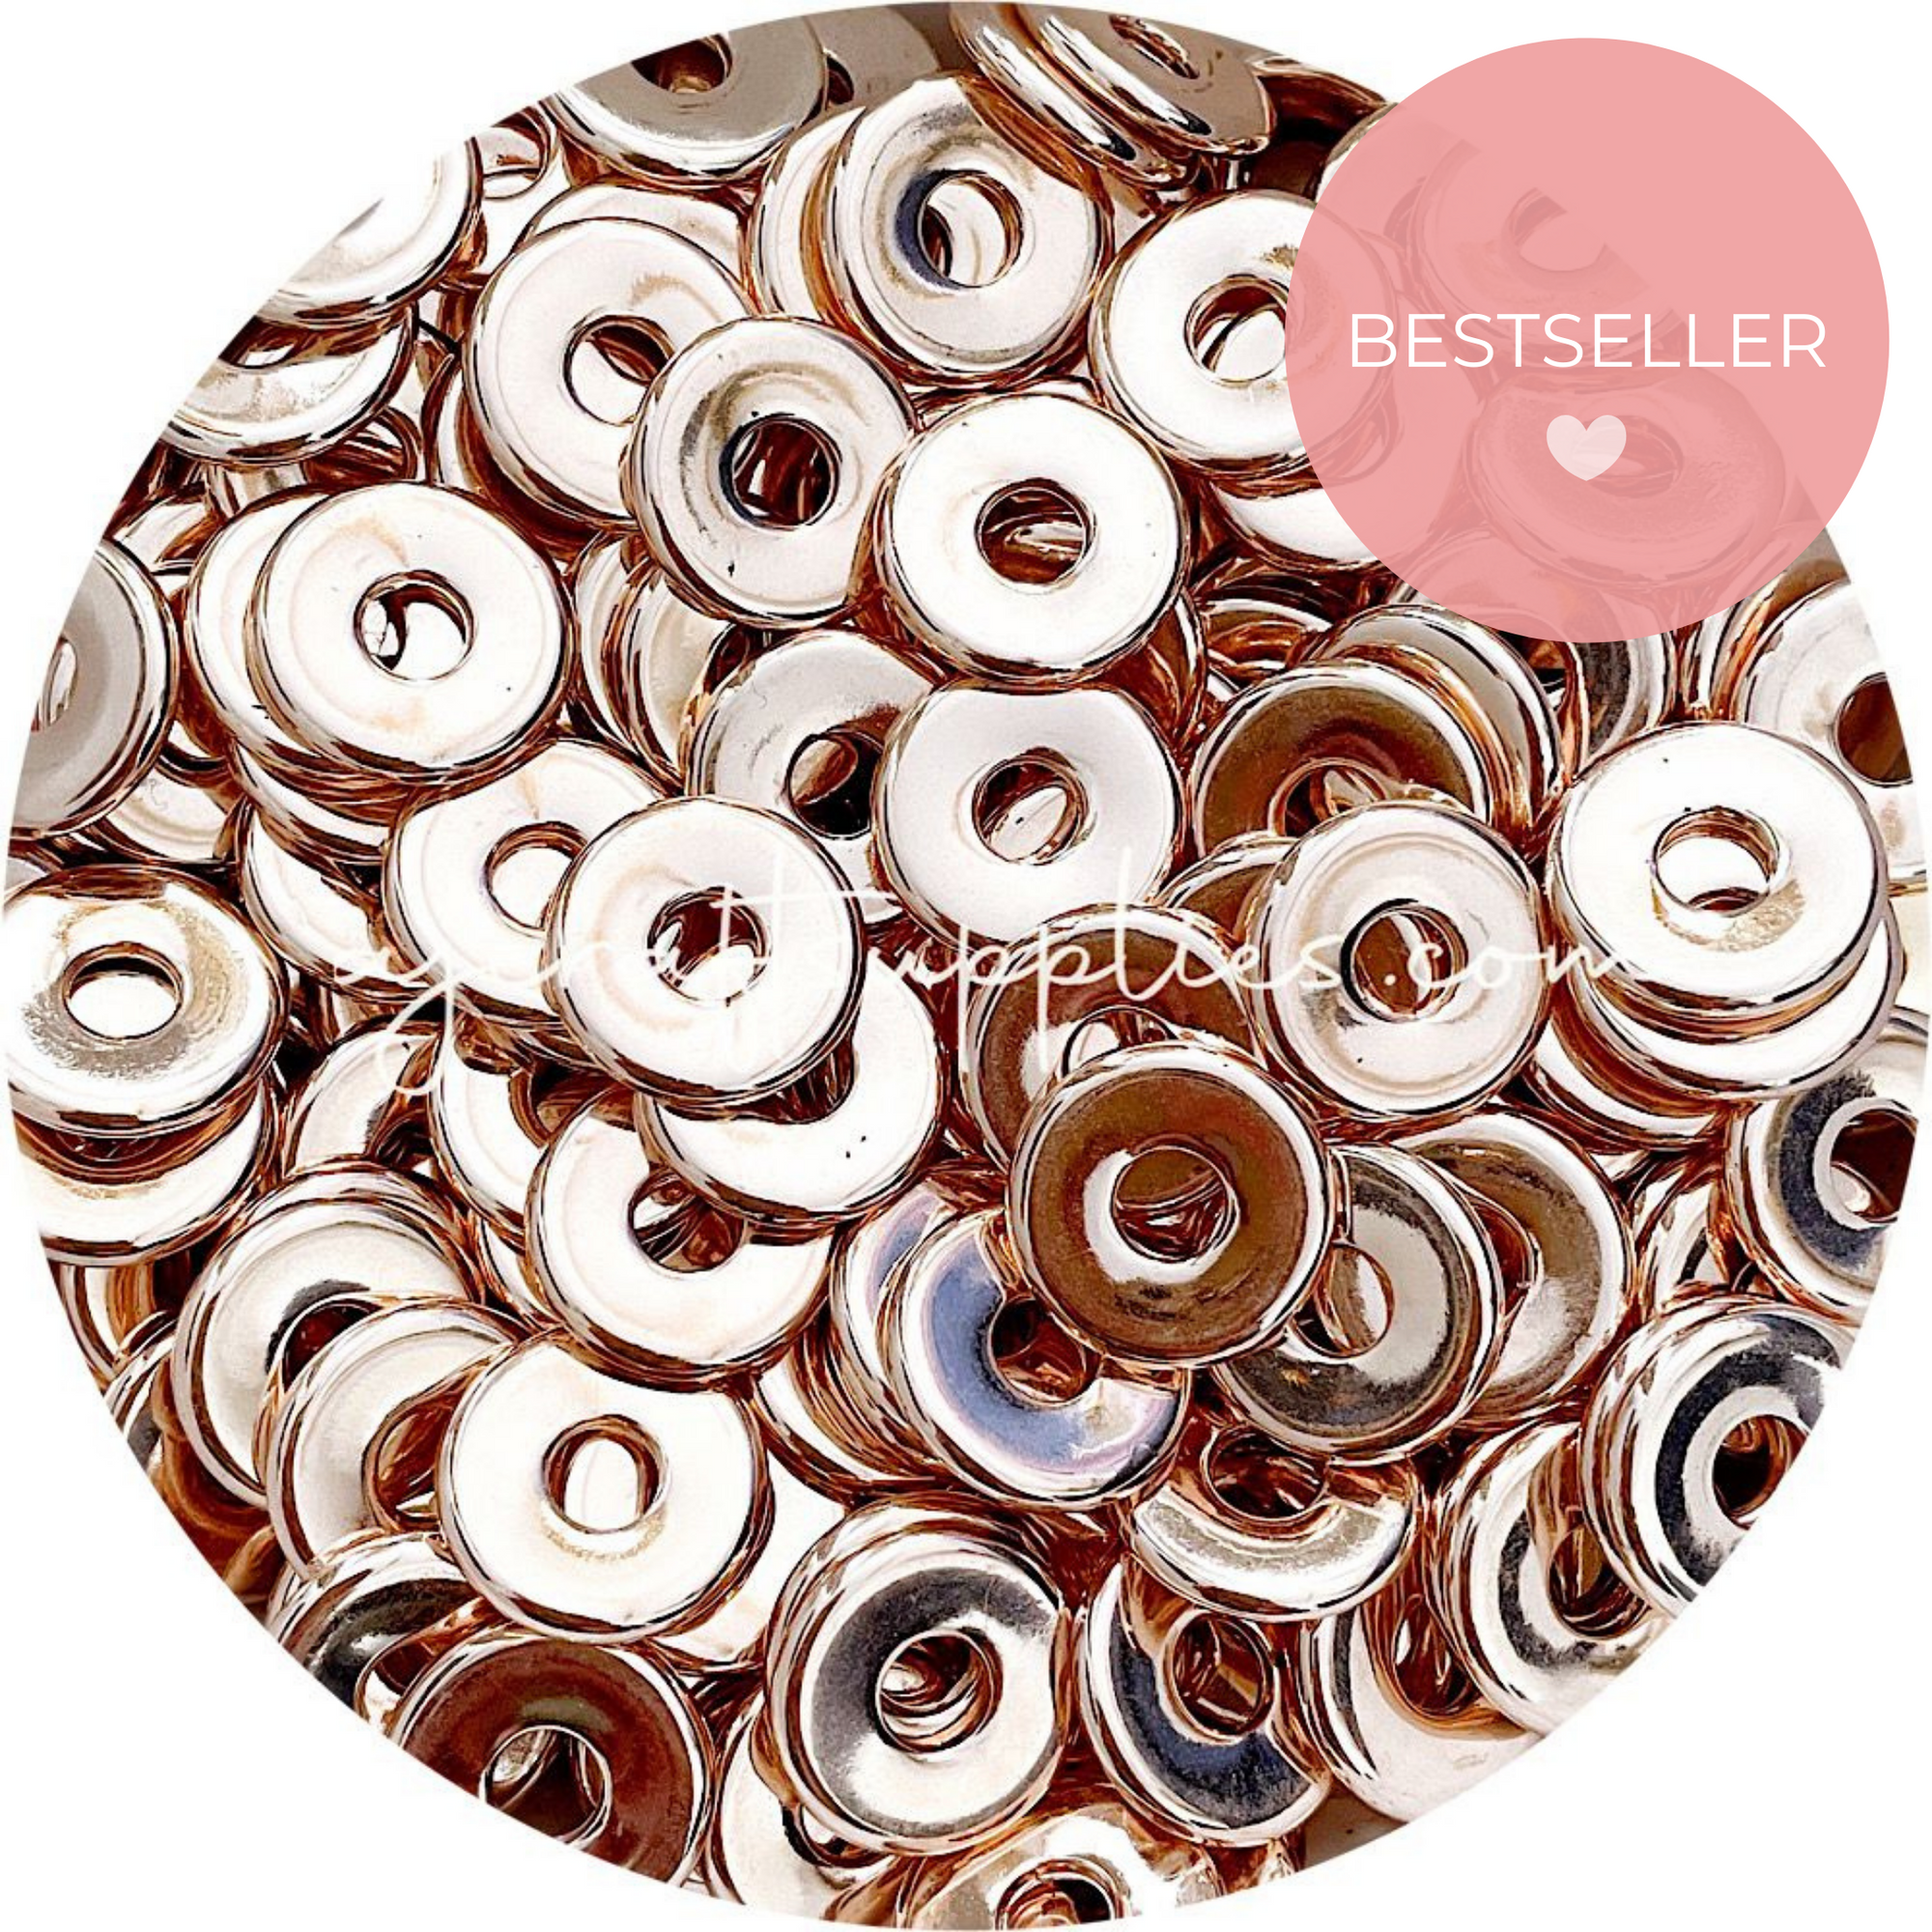 20mm Flat Coin Acrylic Spacer Beads (with Large Hole) - Rose Gold - 5 Beads